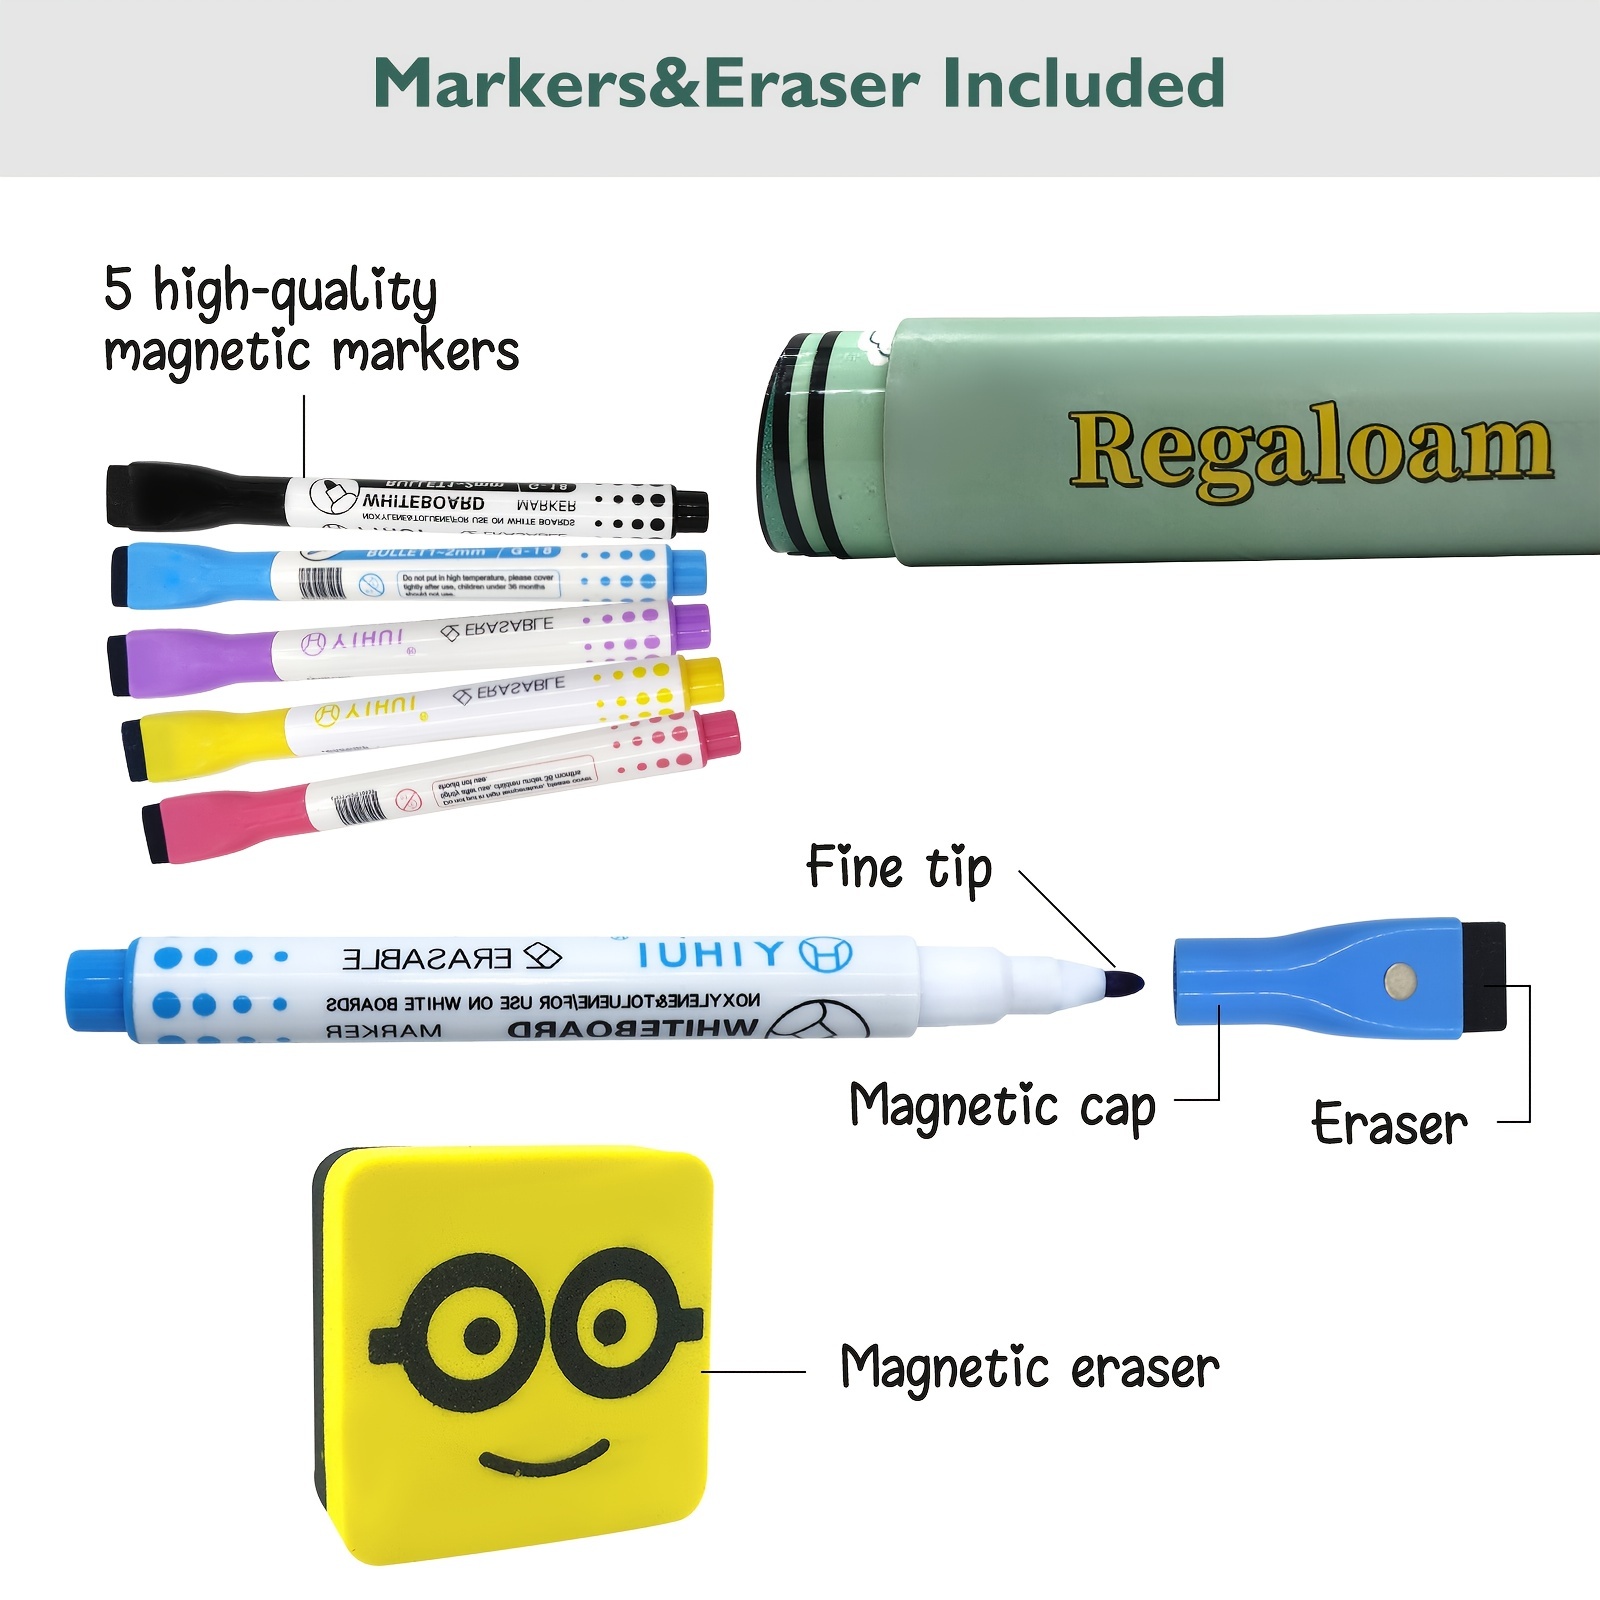 5-color markers